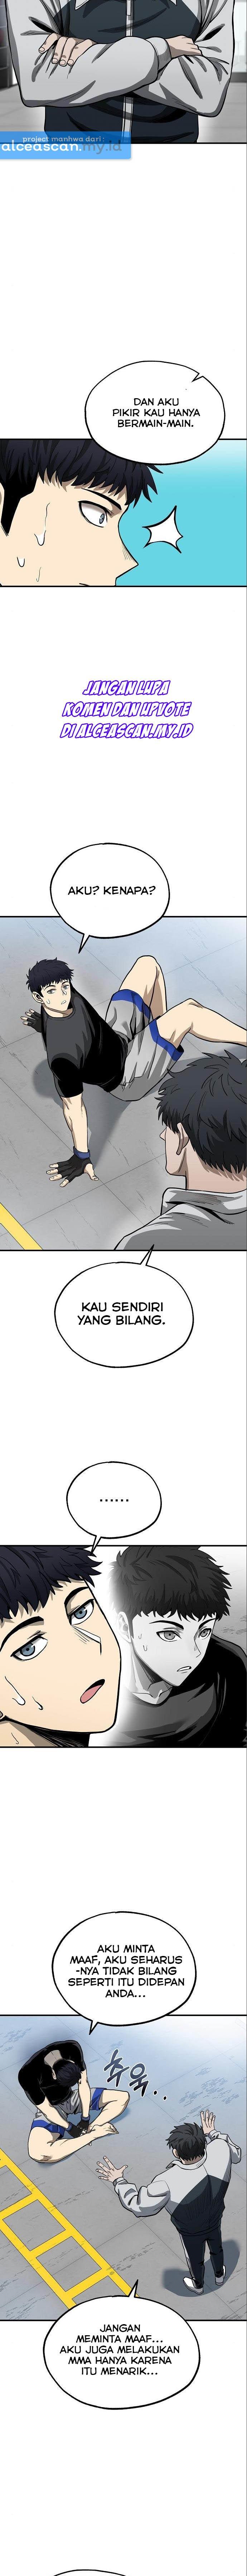 King MMA Chapter 6